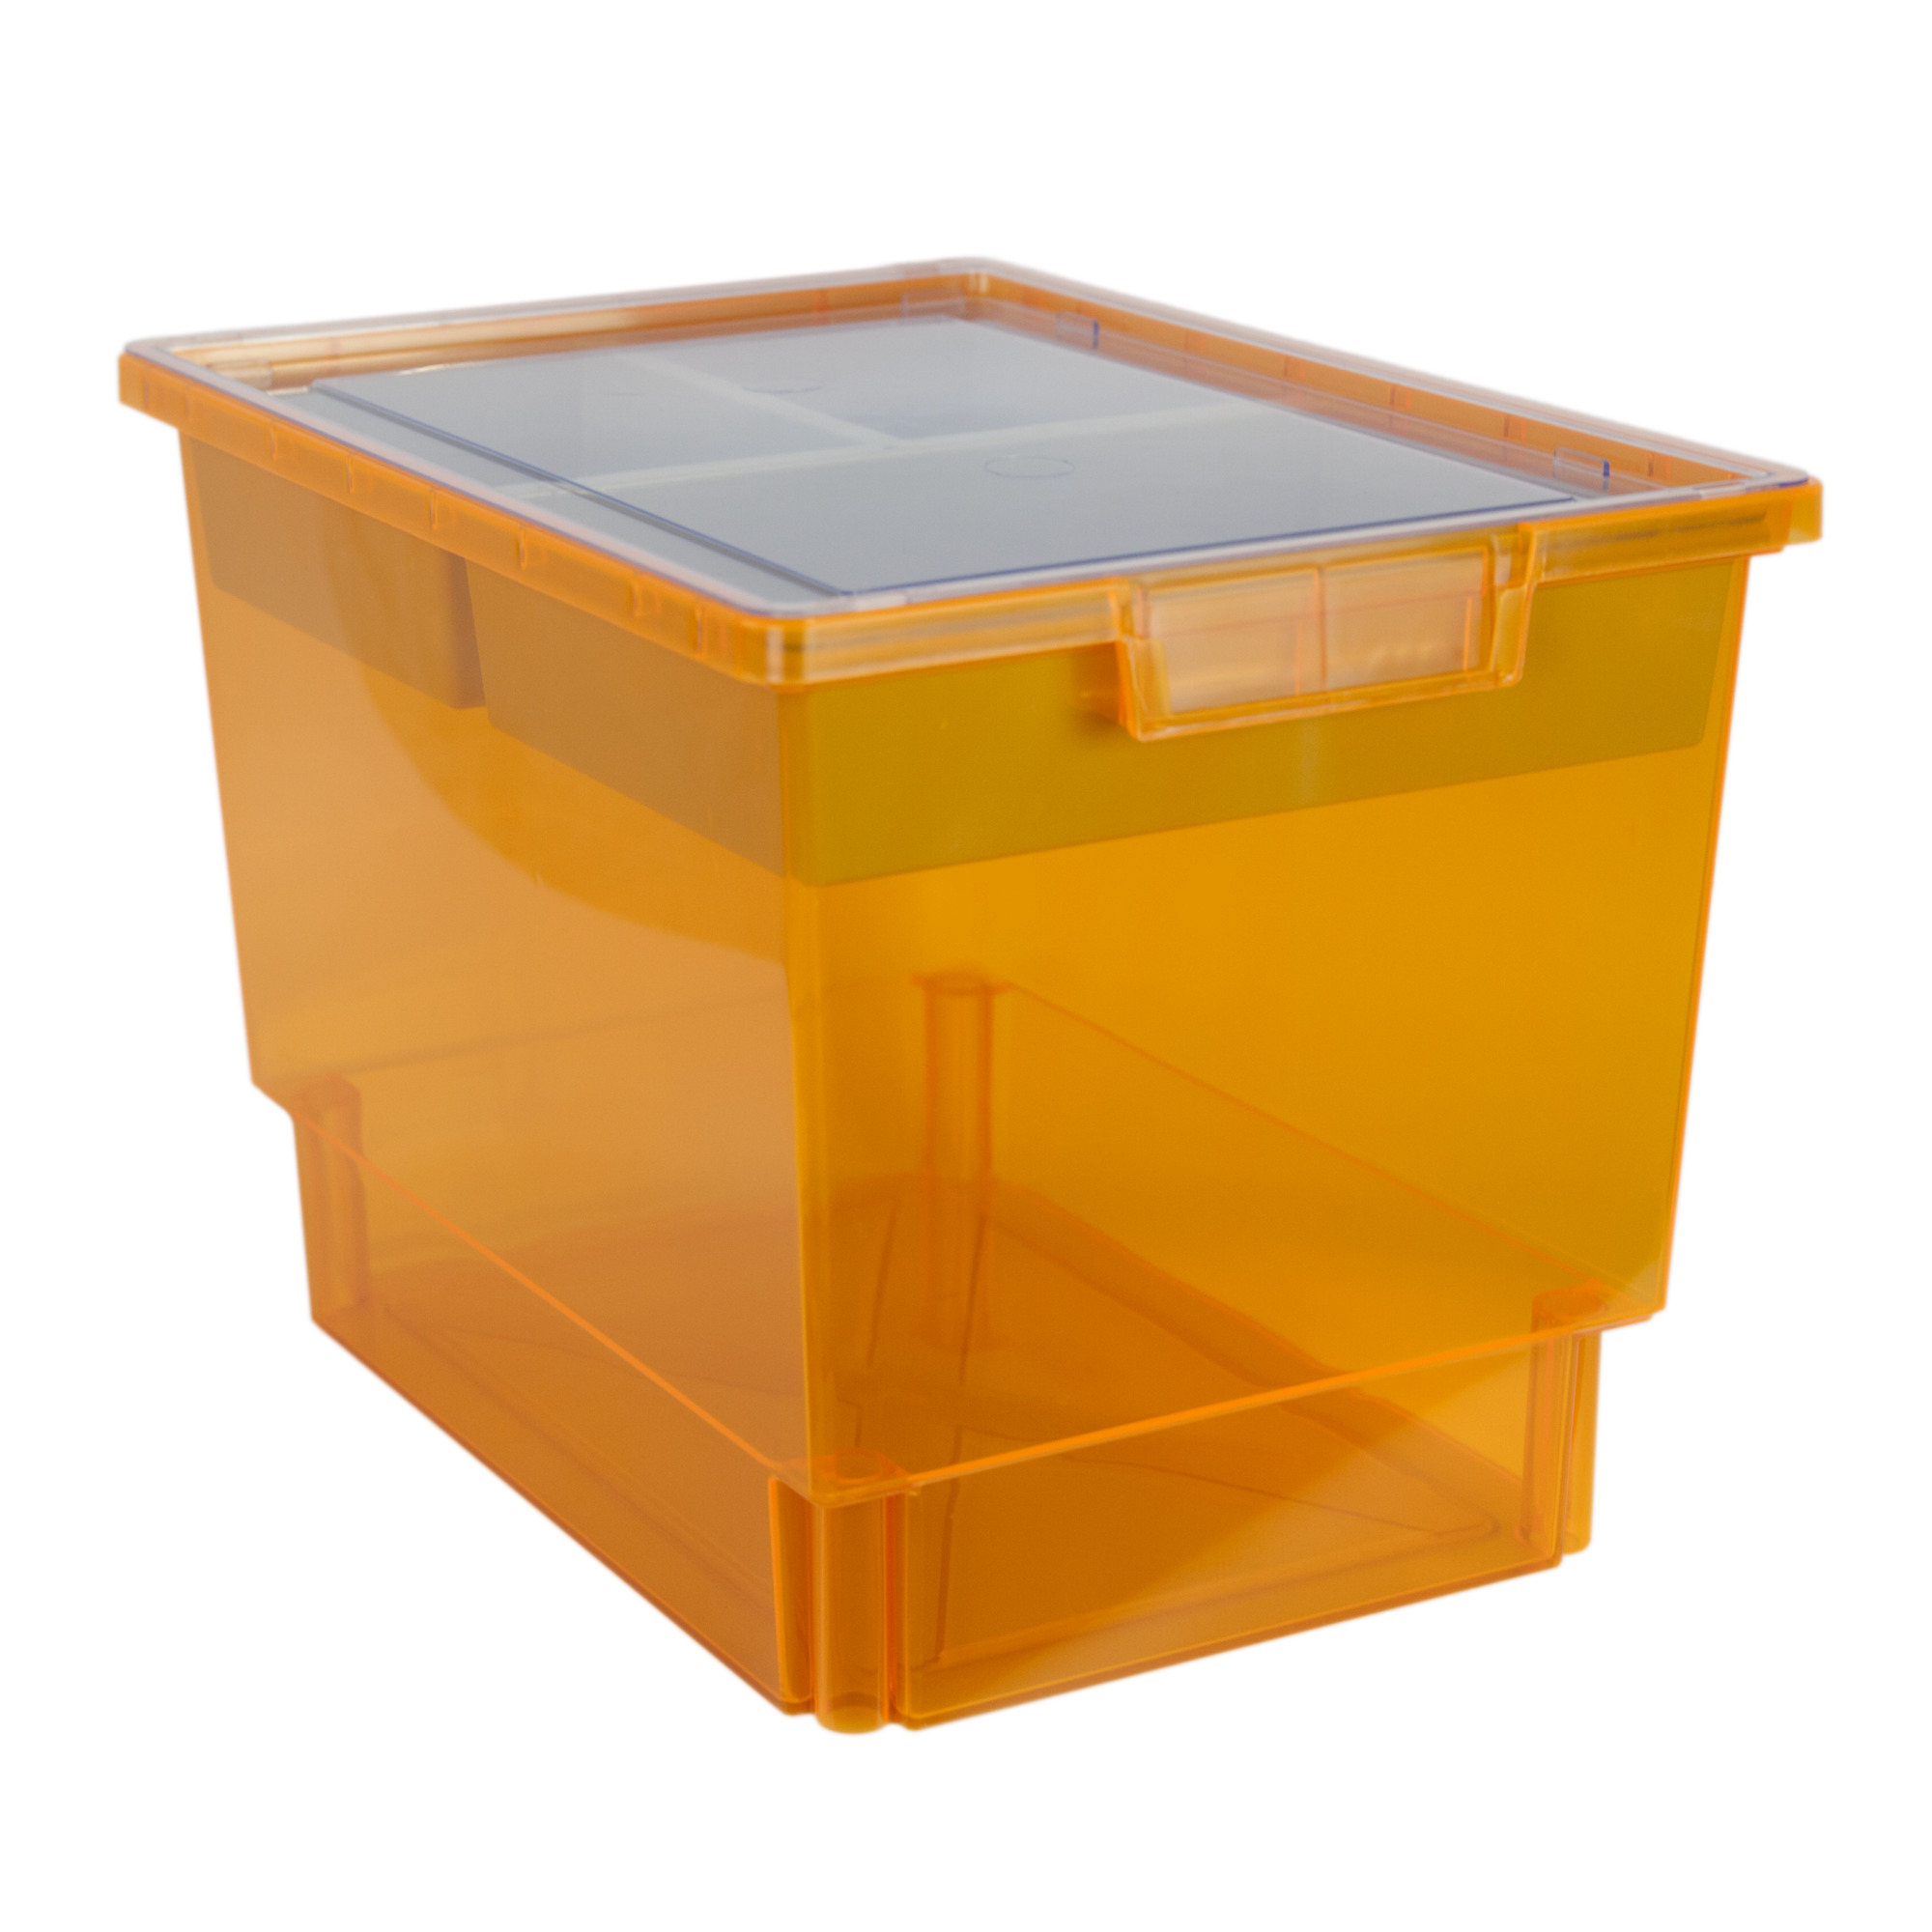 Certwood StorWerks, Slim Line 12Inch Tray Kit (3 x Divisions) Orange-3PK, Included (qty.) 3, Material Plastic, Height 9 in, Model CE1954FO-NK0004-3